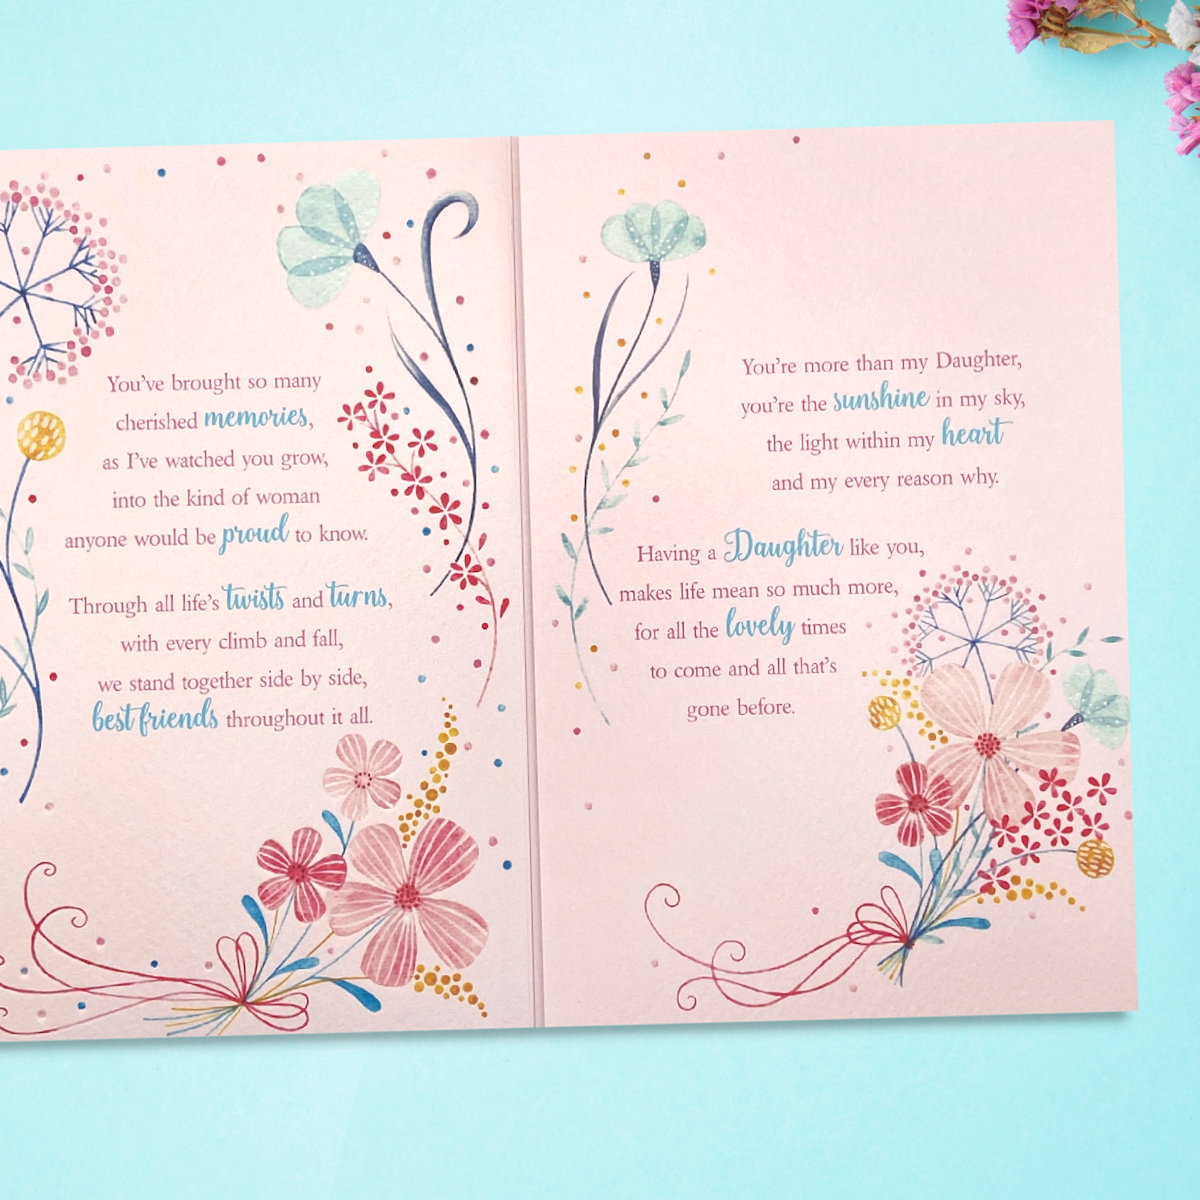 Two further pages with verse and floral decorations